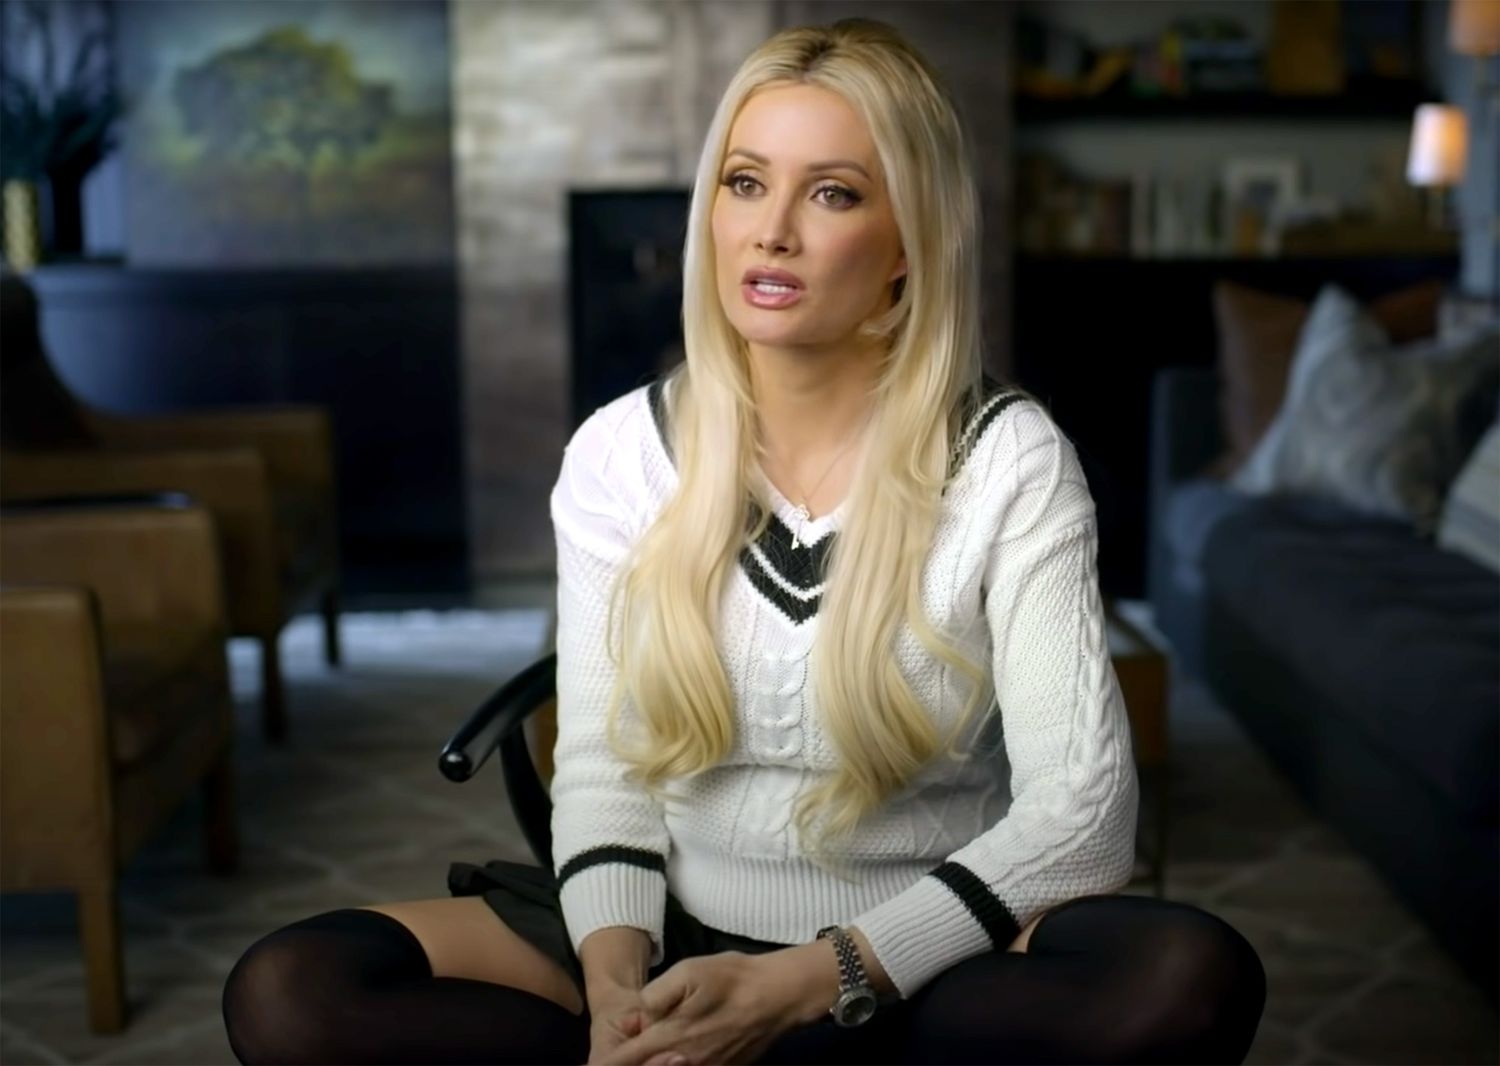 Holly Madison says she was afraid to leave Playboy mansion due to 'mountain of revenge porn'